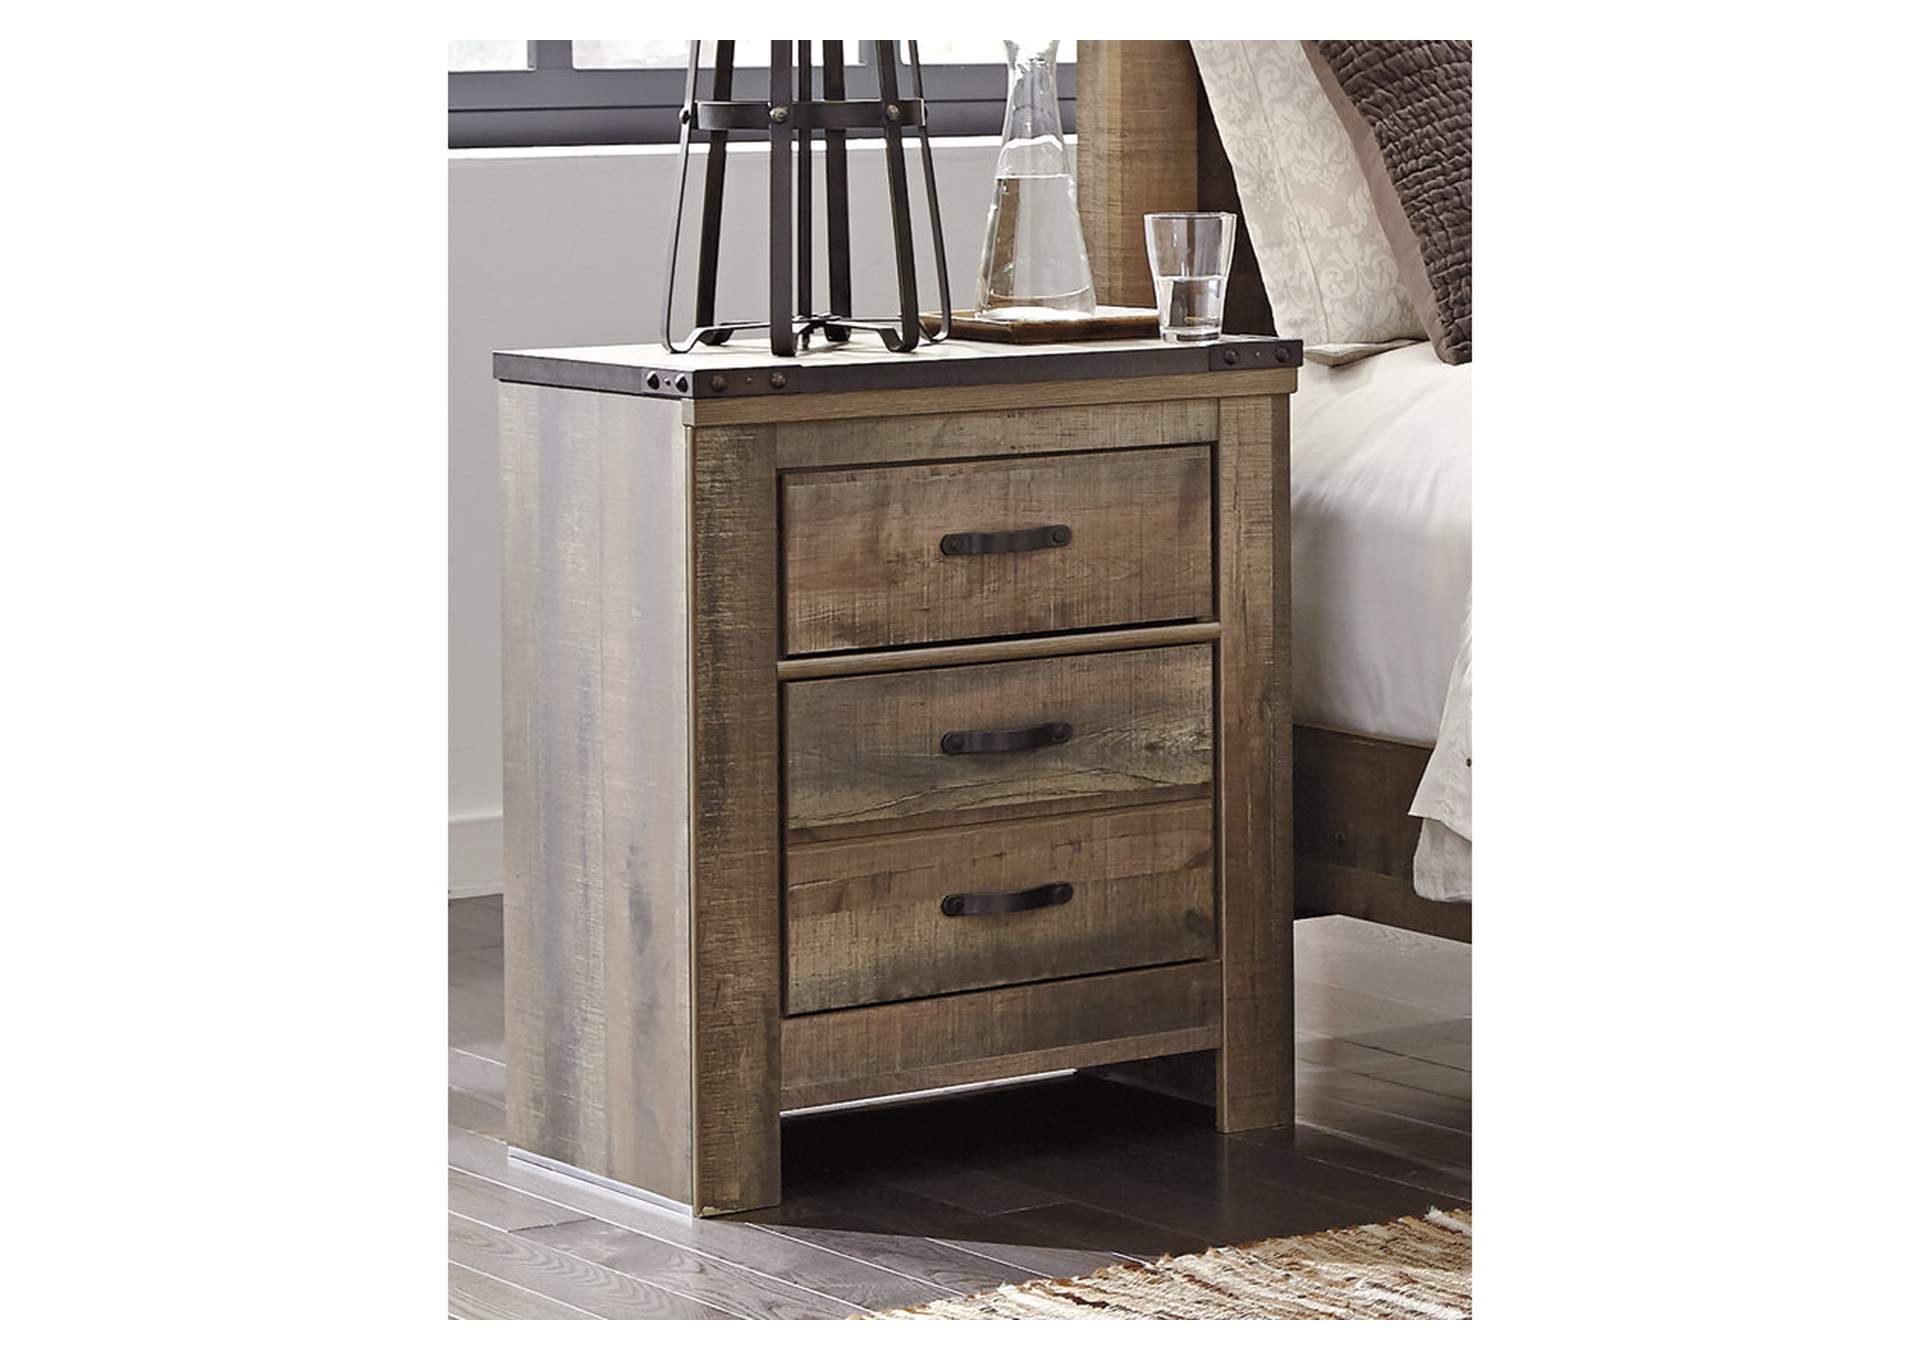 Trinell King Panel Bed and Nightstand,Signature Design By Ashley